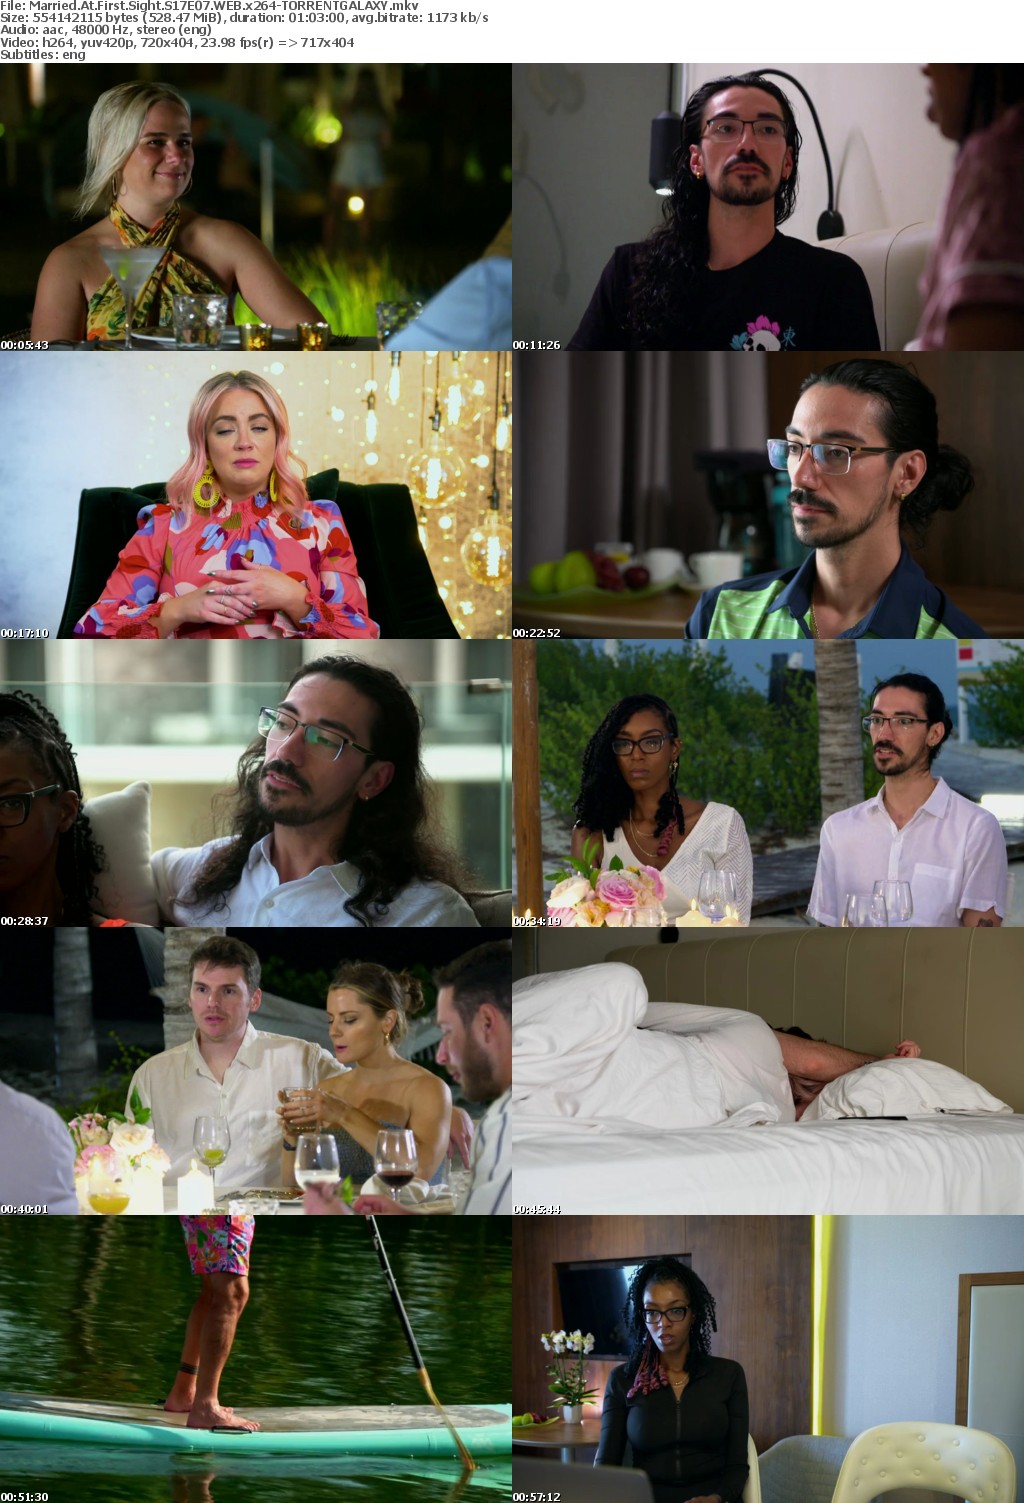 Married At First Sight S17E07 WEB x264-GALAXY